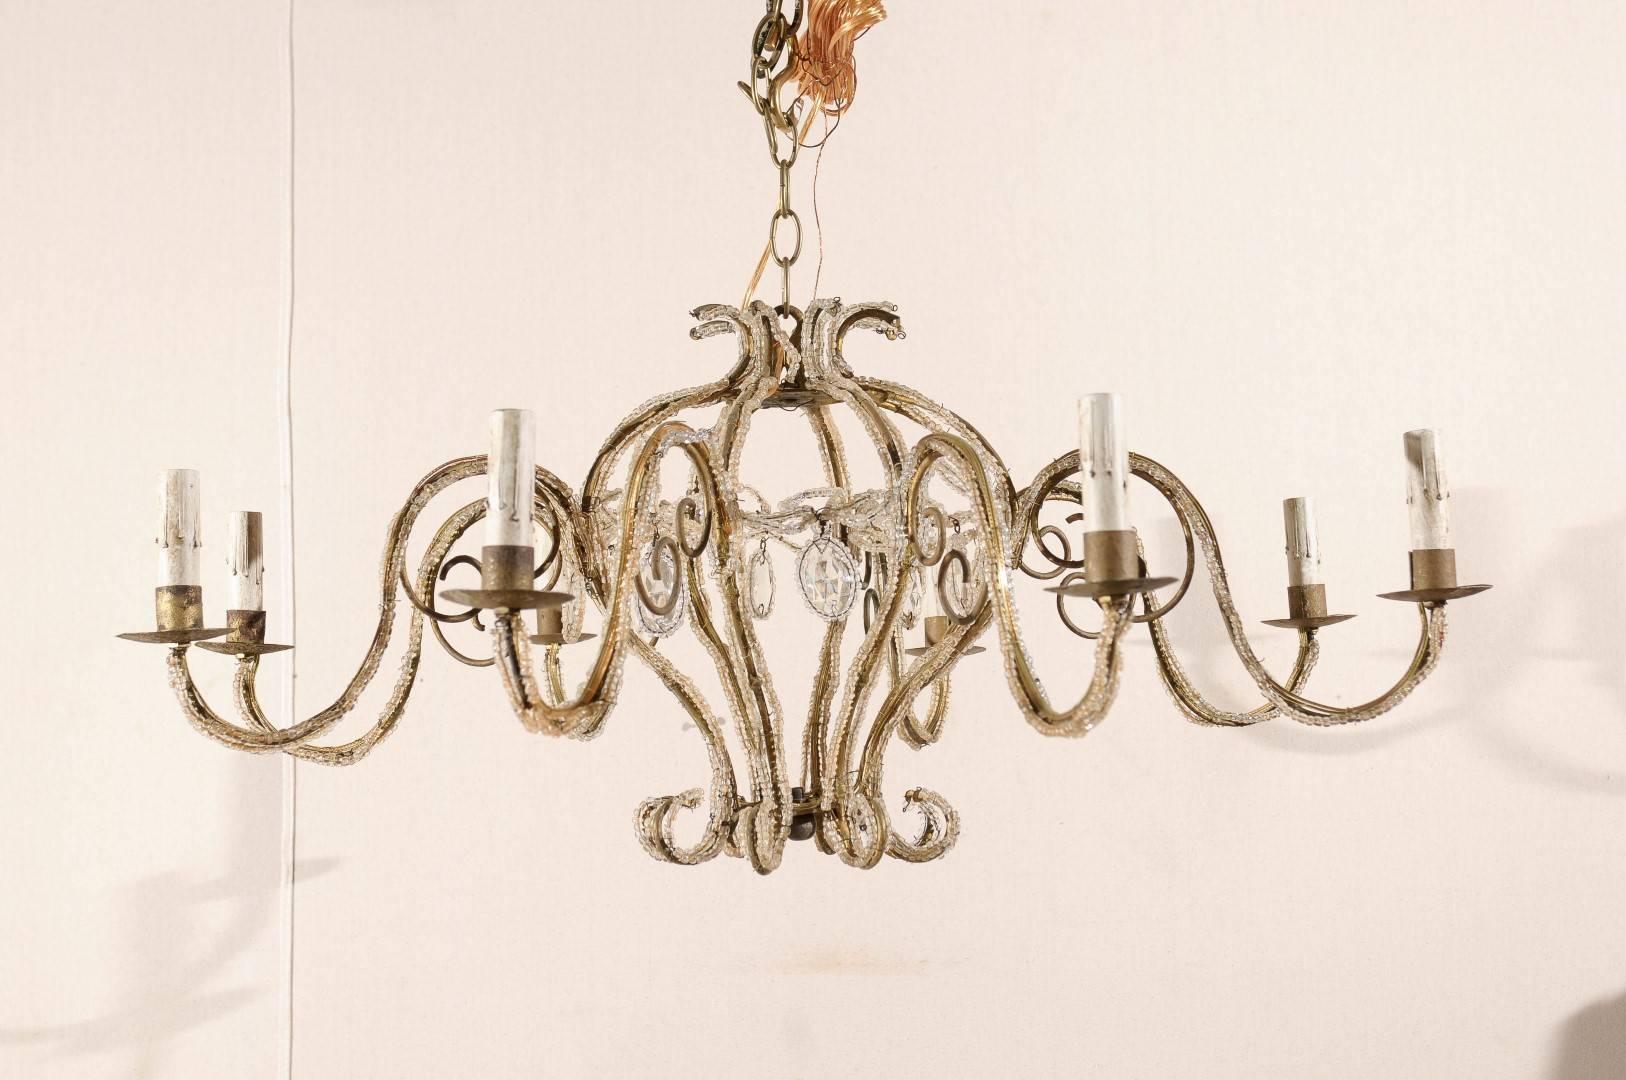 An Italian eight-light chandelier from the mid-20th century. This Italian chandelier features a central gilded armature made of S-scrolls from which delicate crystals and ribbon shaped beaded motifs hang. Eight swoop arms decorated with beading